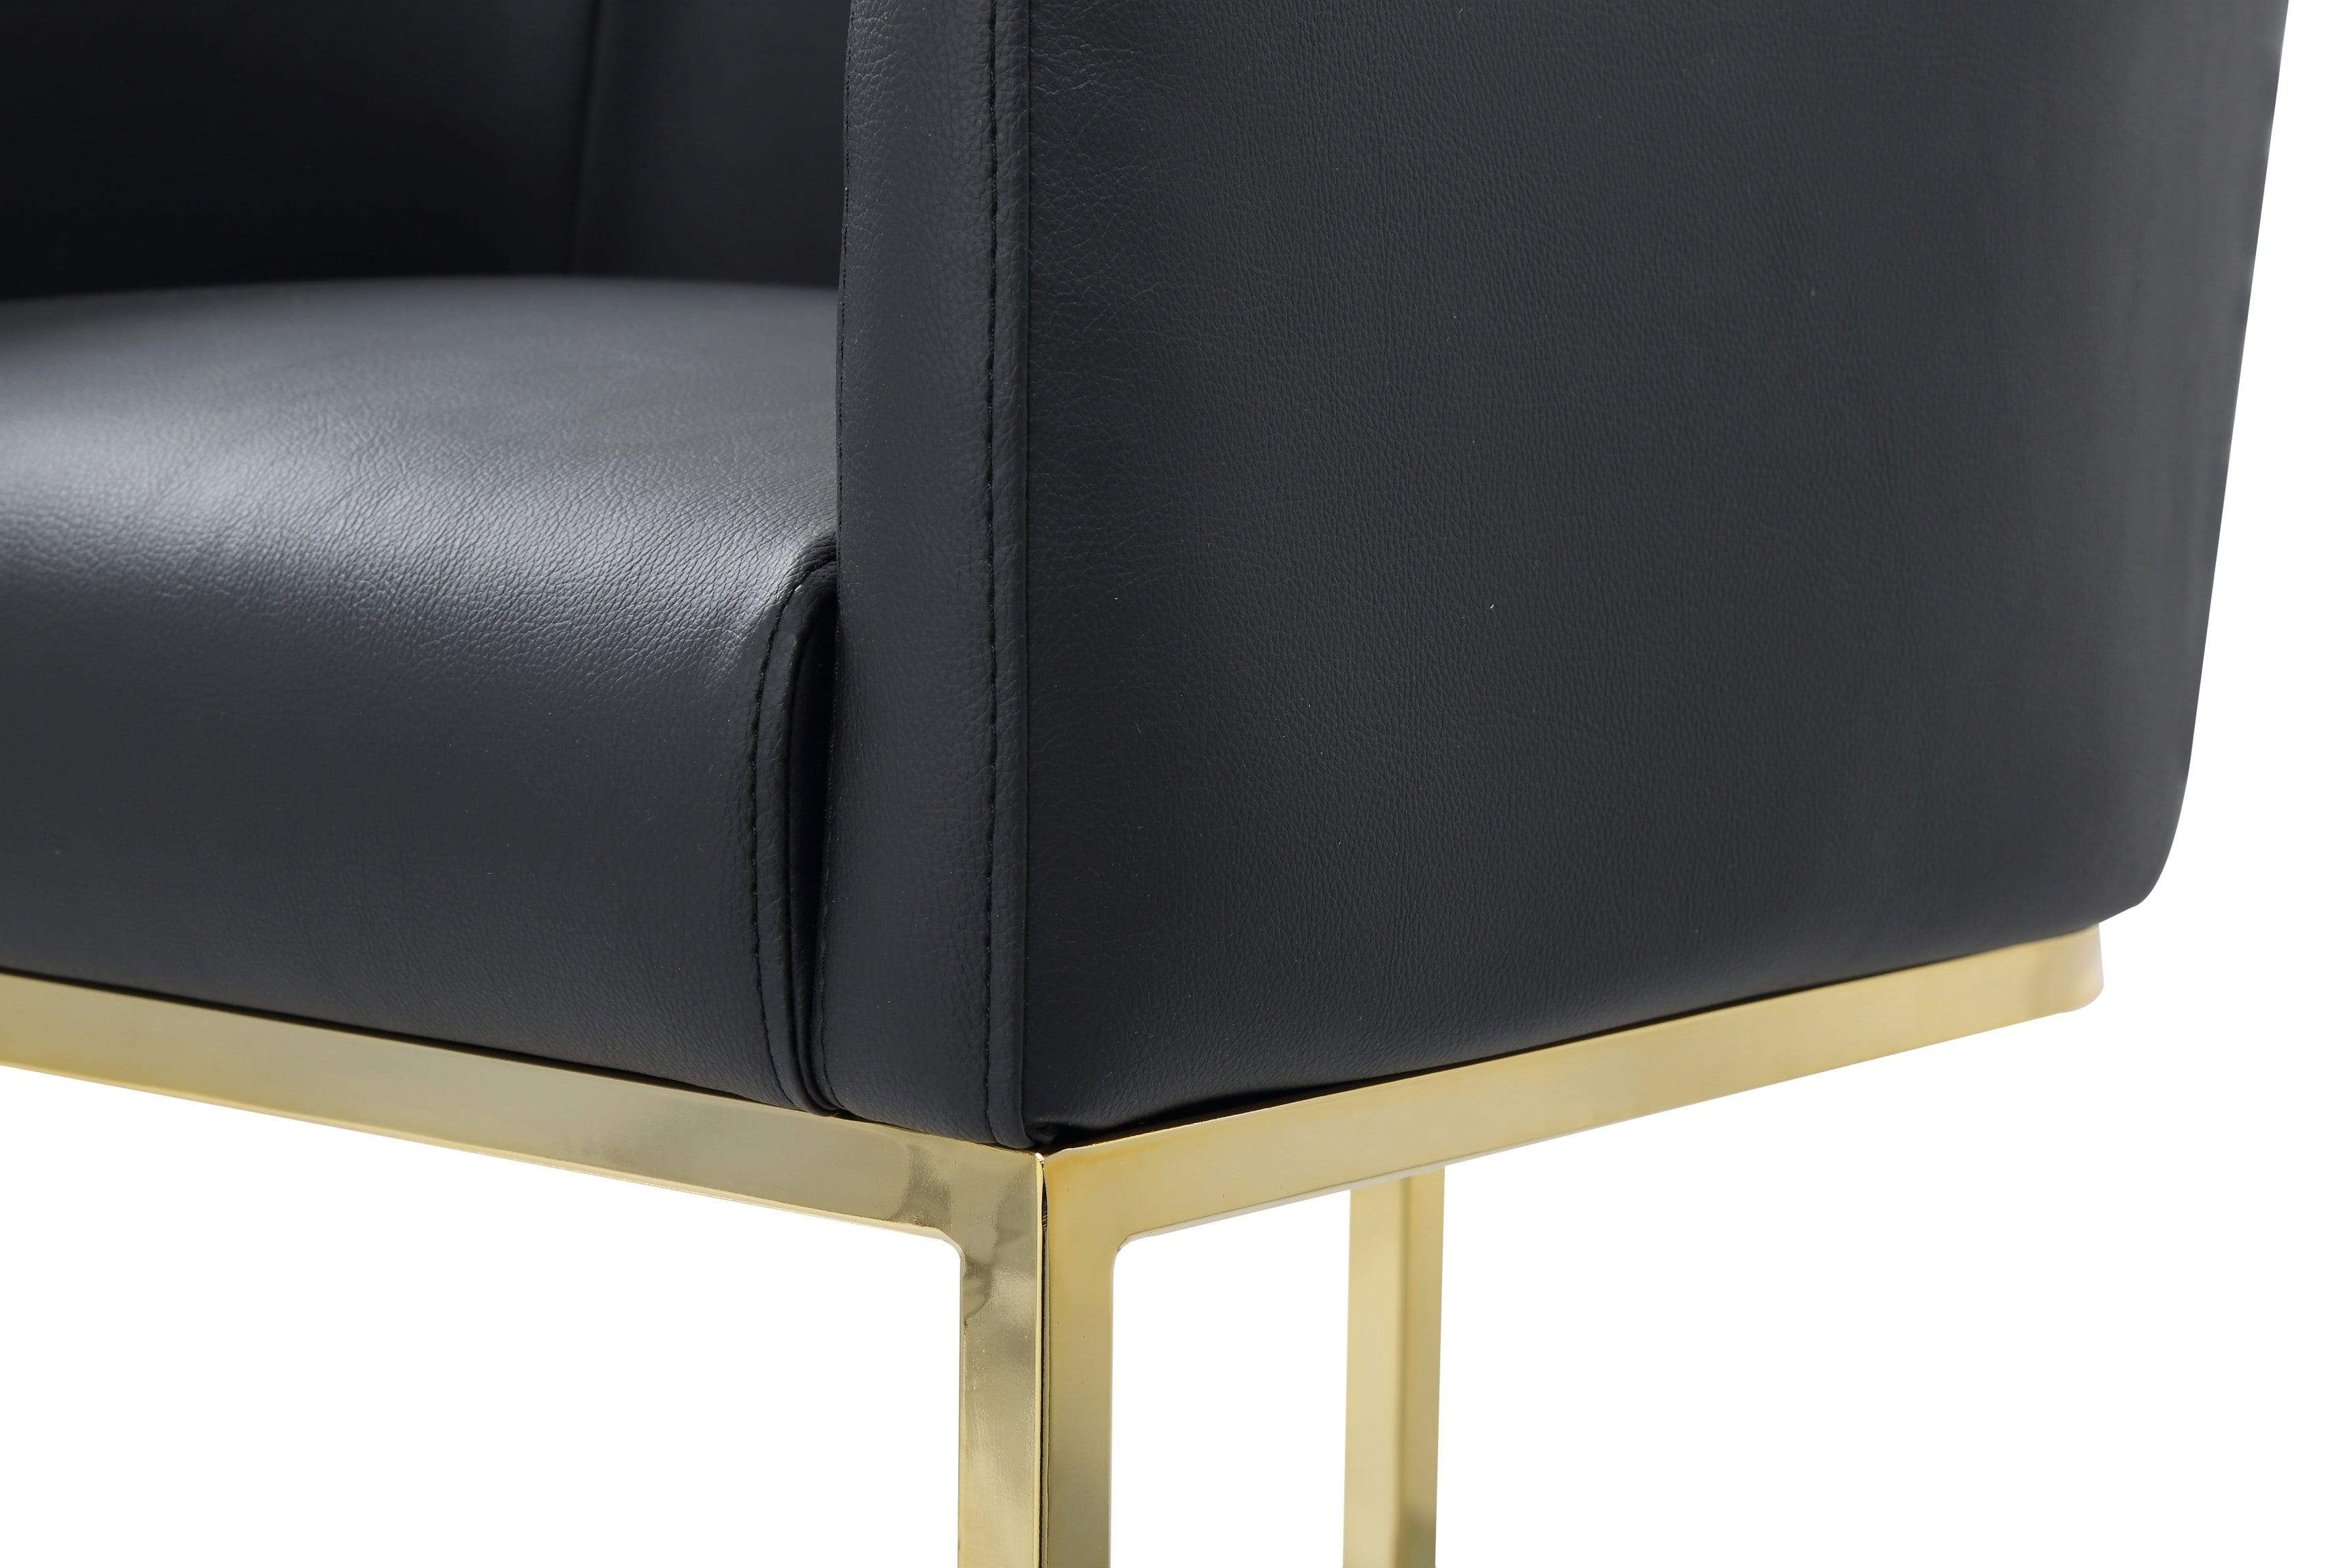 Easly Faux Leather Counter Stool Chair Gold Base